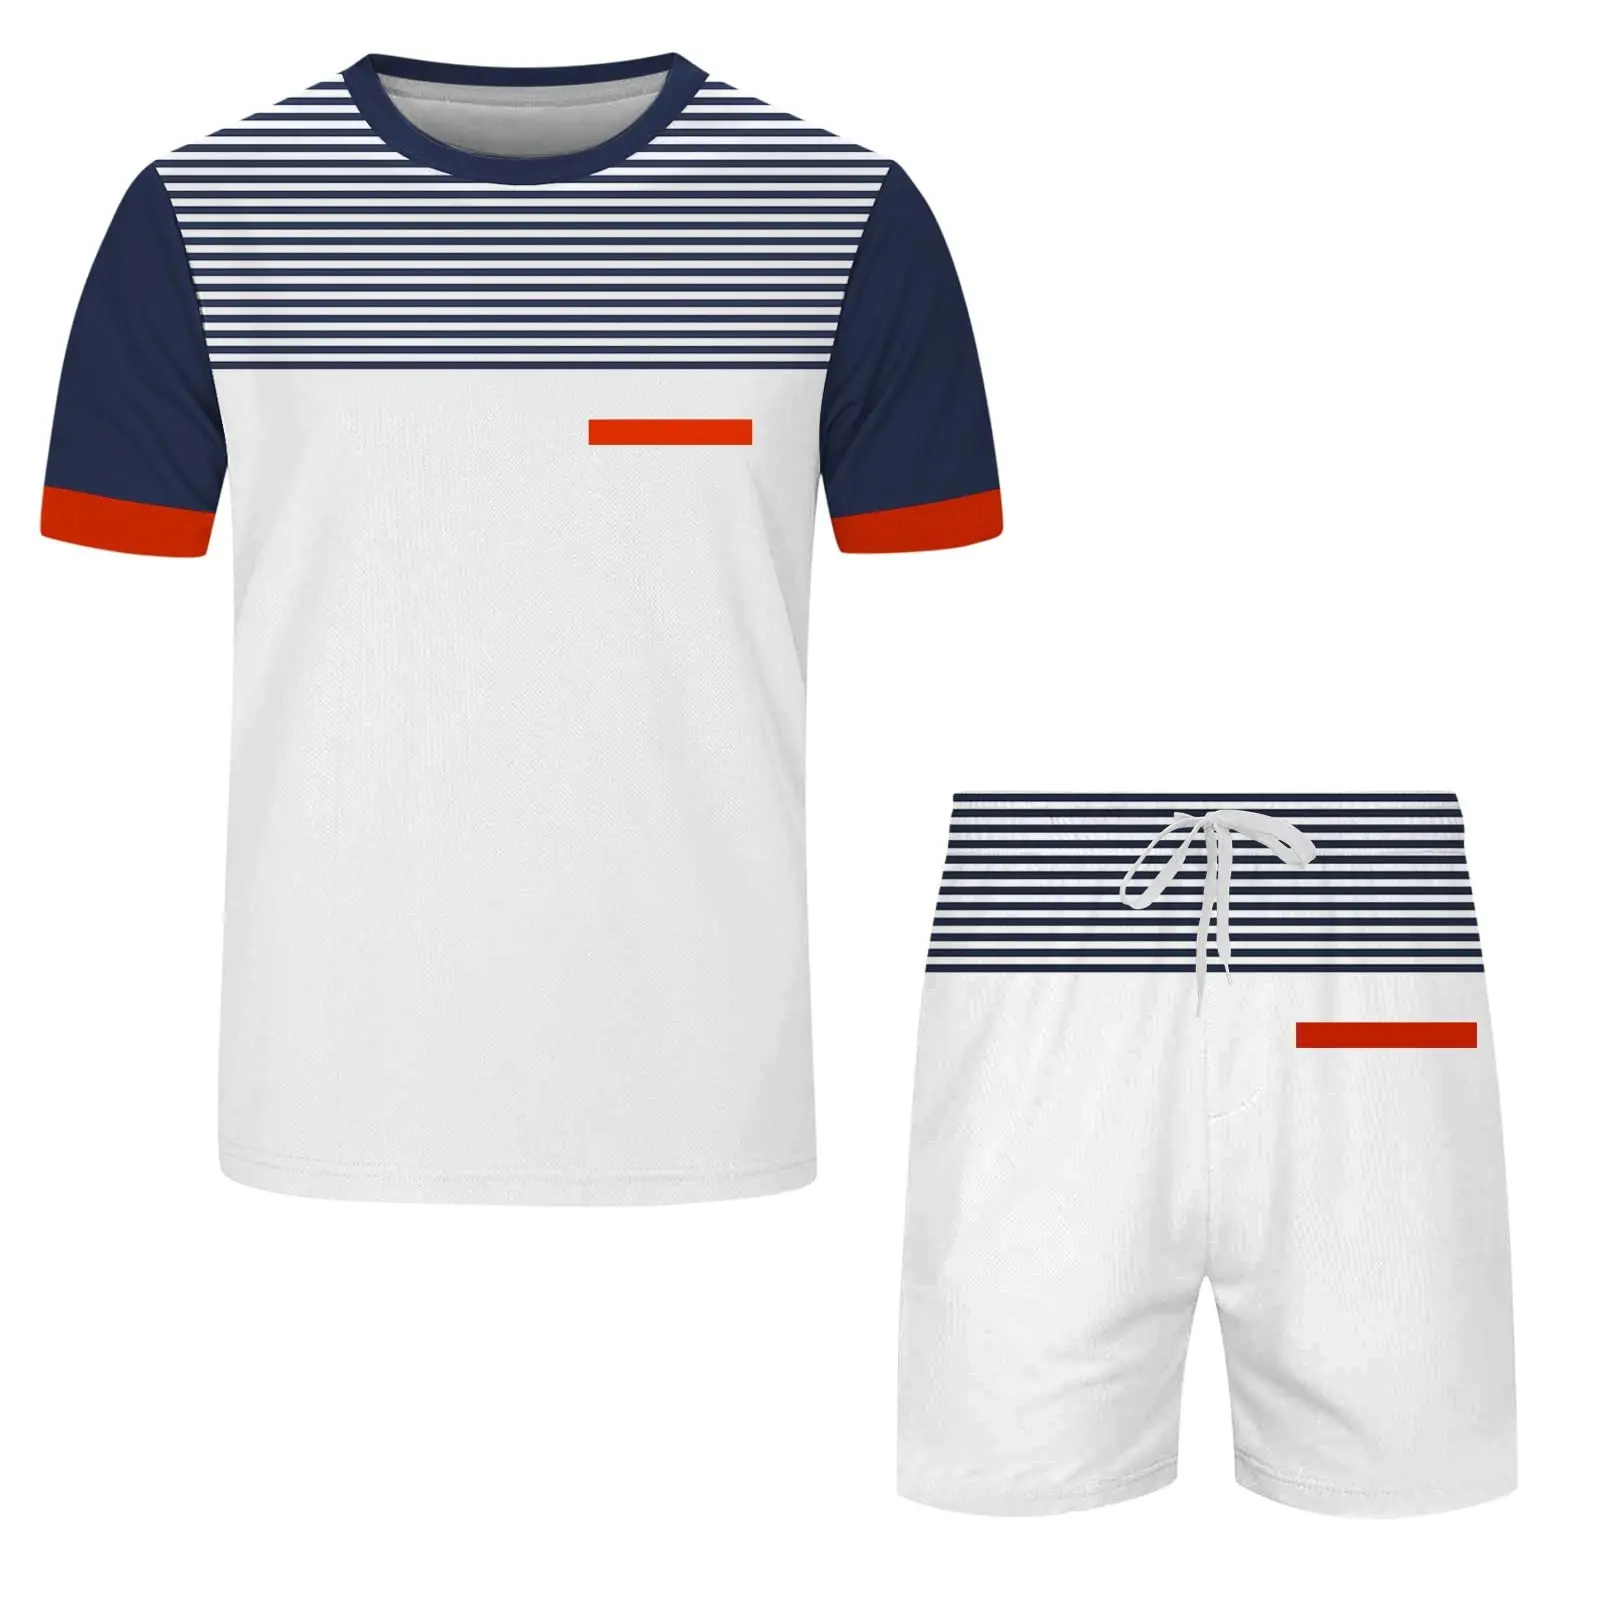 Men's Summer Big Men 2 Piece Short Sleeve T Shirts and Shorts Trendy Sets Beach Outfit Sets